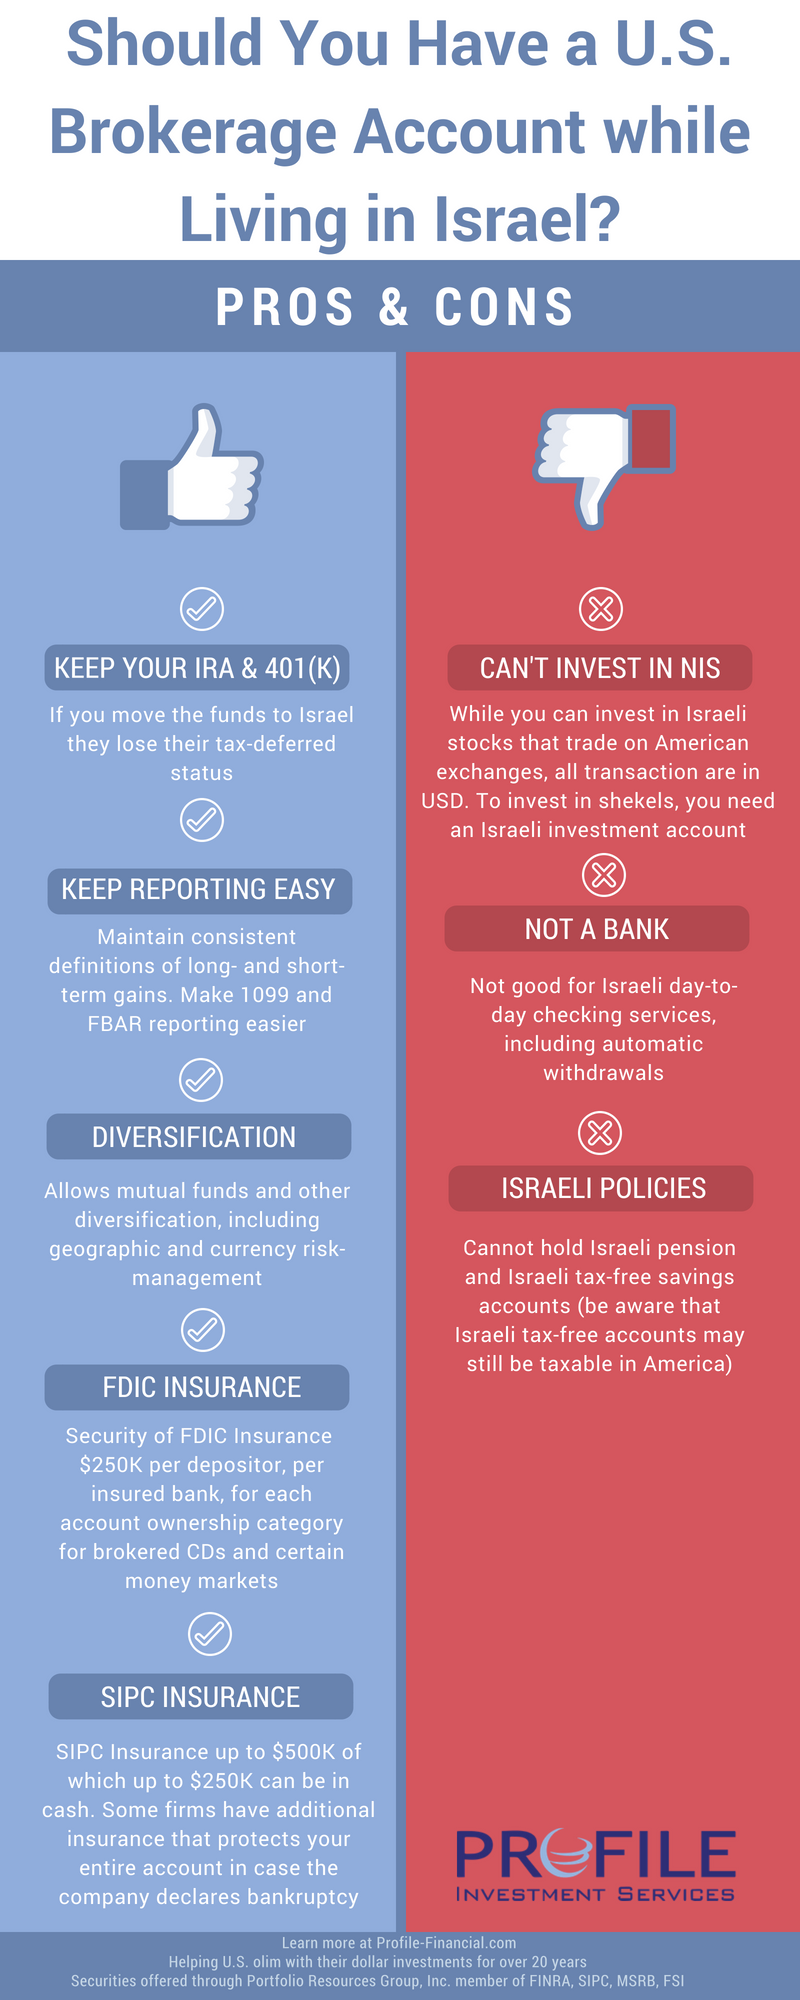 Pros and Cons of having a U.S. Brokerage account while living in Israel